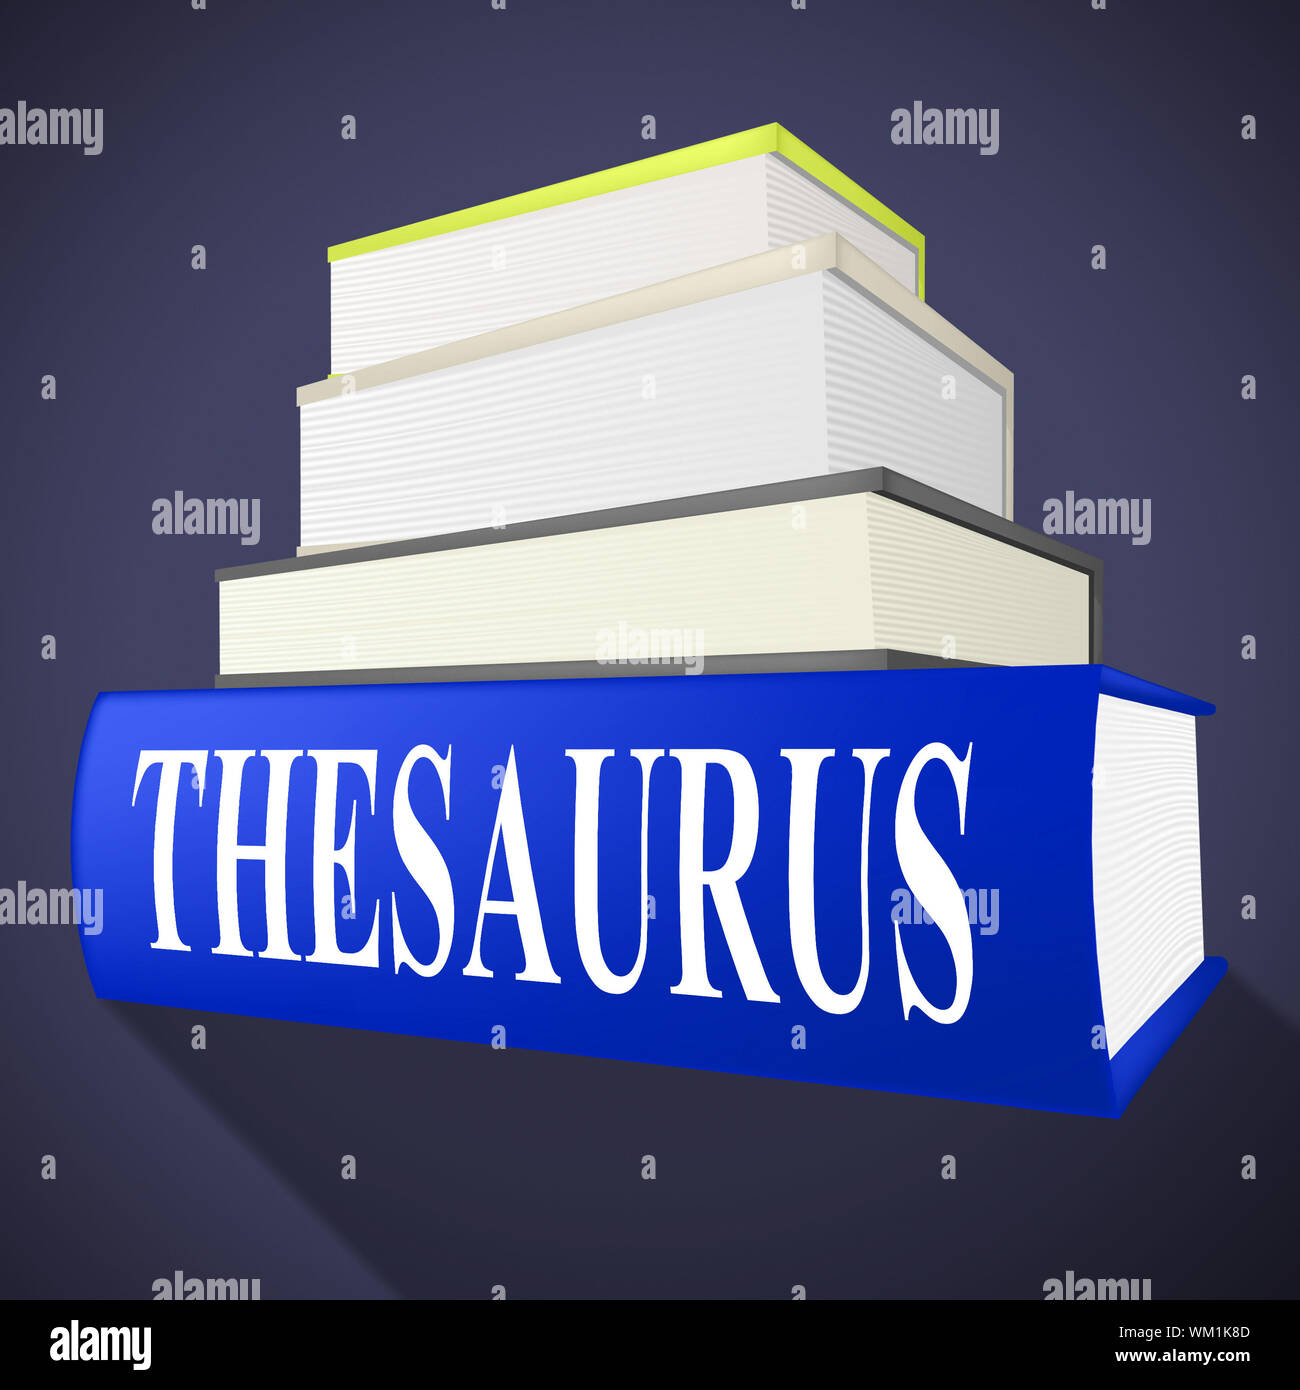 Thesaurus Book Representing Dictionaries Synonym And Information Stock Photo